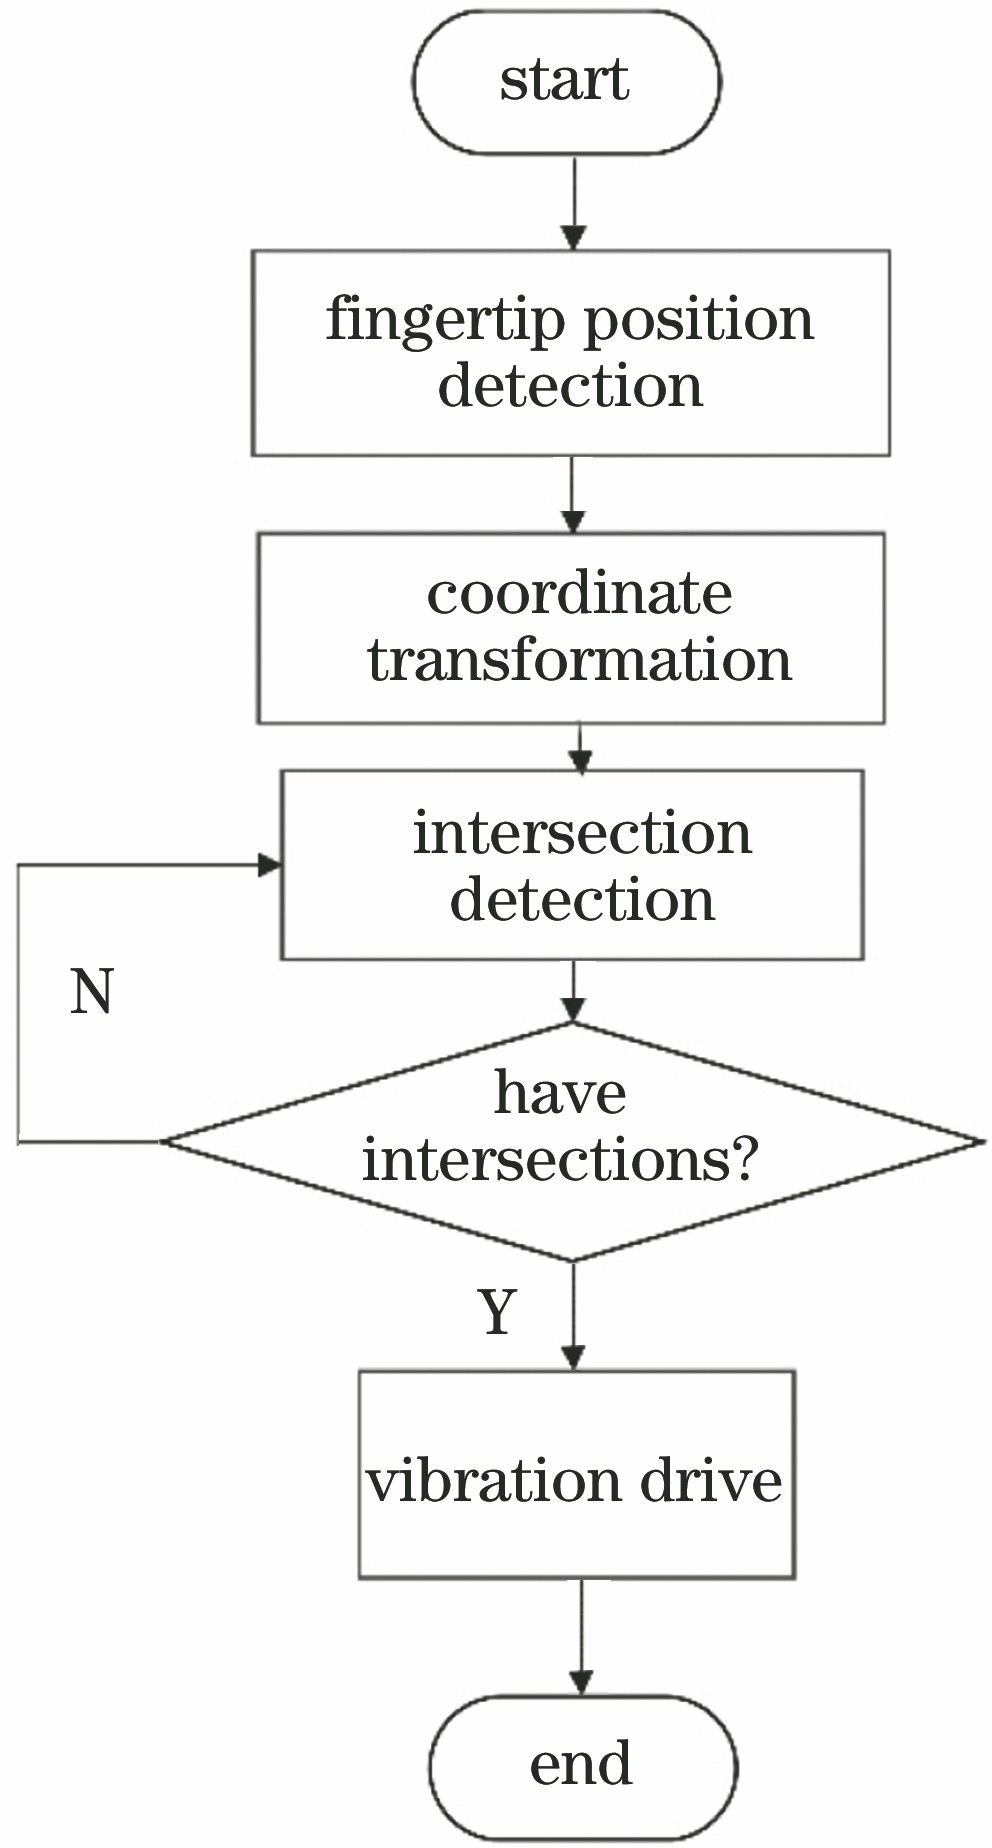 Flowchart of haptic interaction system